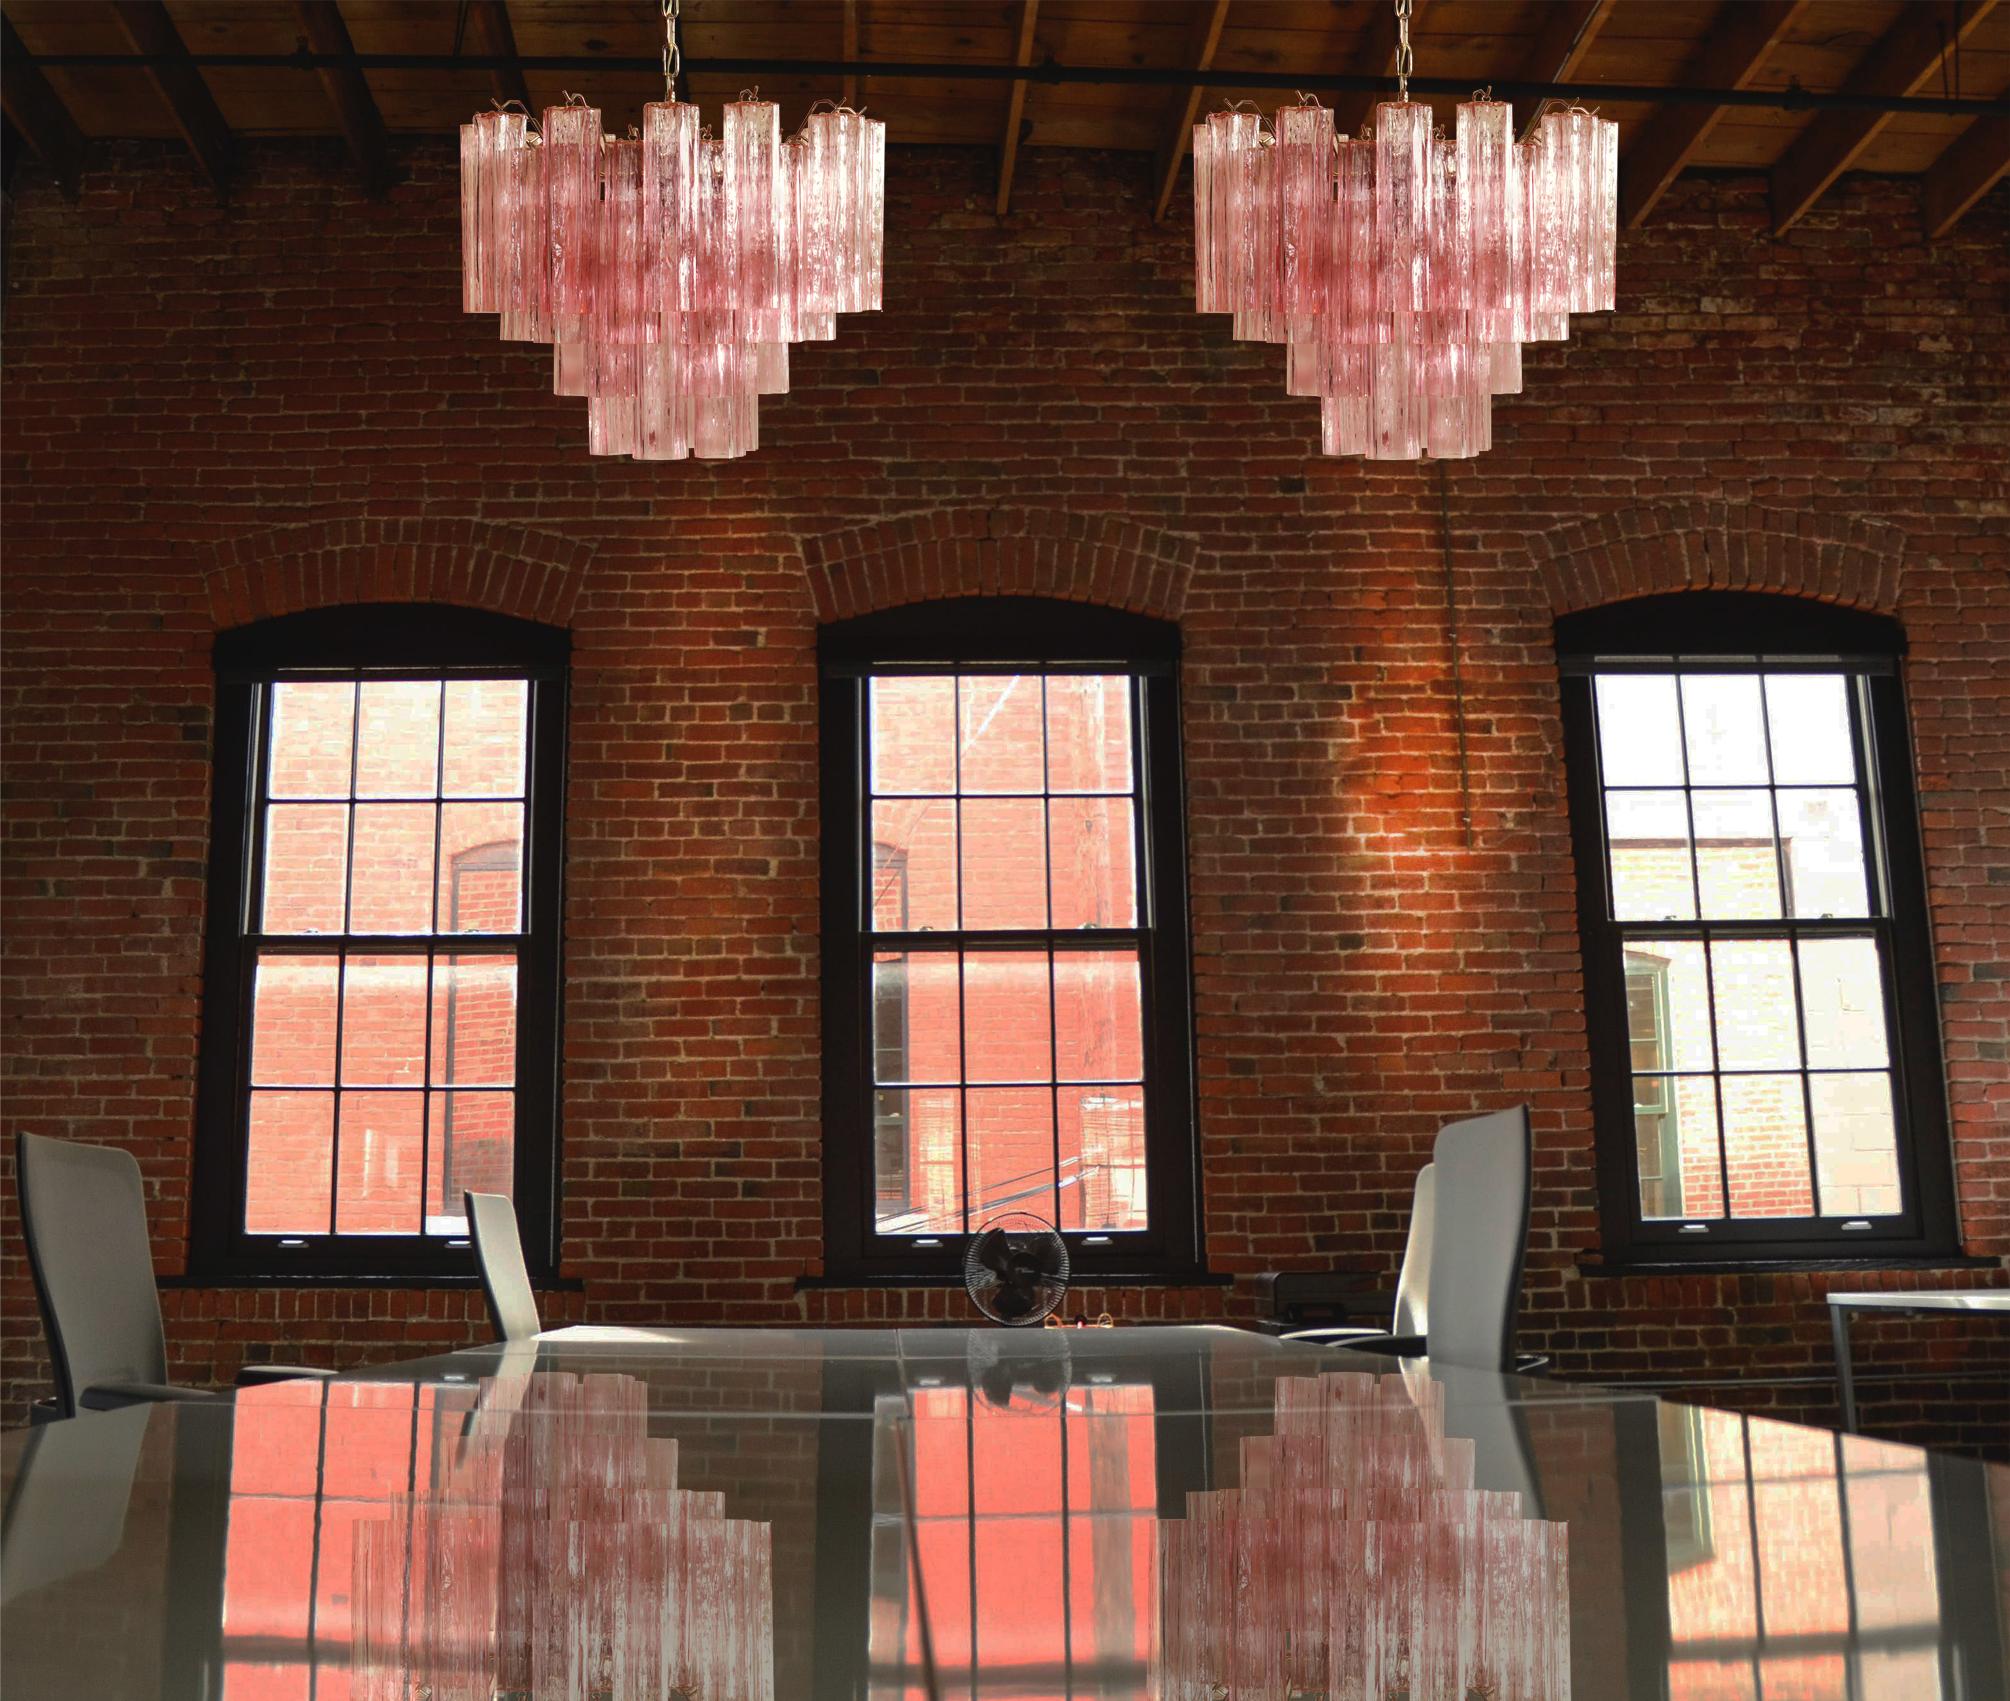 Four Italian vintage chandeliers in Murano glass and nickel-plated metal structure. The armor polished nickel supports 36 large pink glass tubes in a star shape.
Period: Late 20th century
Dimensions: 45.30 inches (115 cm) height with chain, 19.70